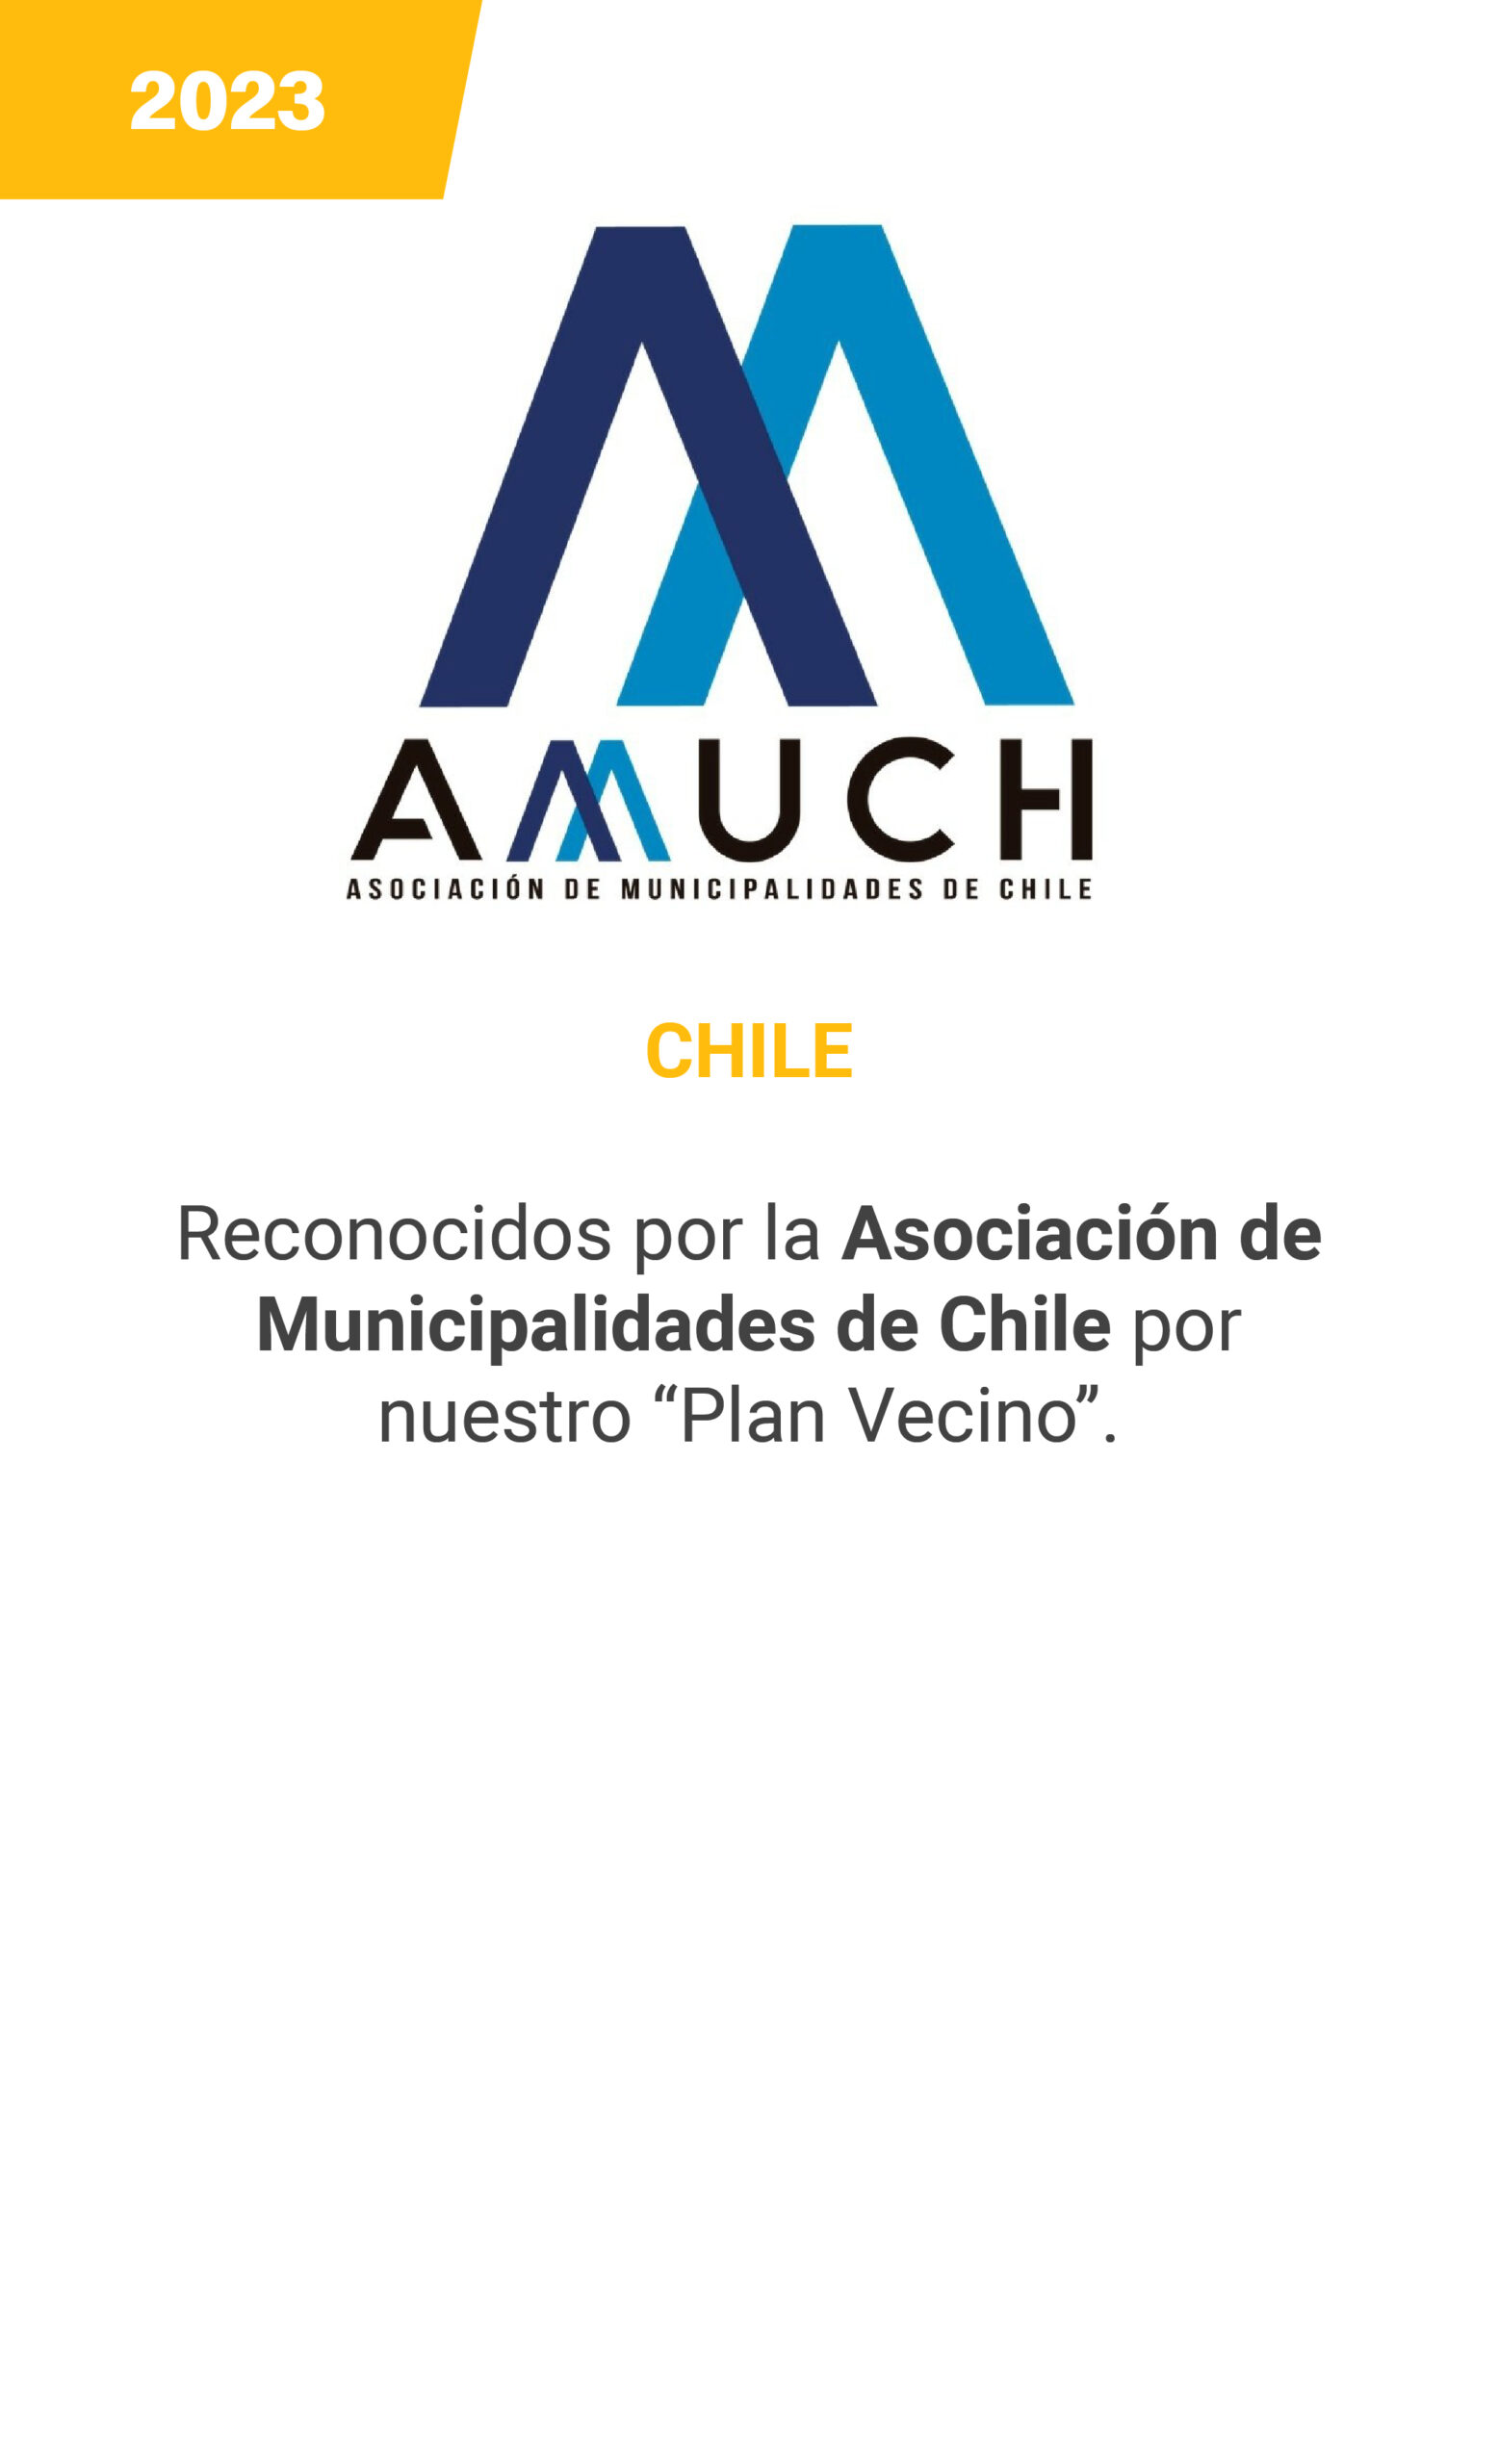 AMUCH - Chile mobile